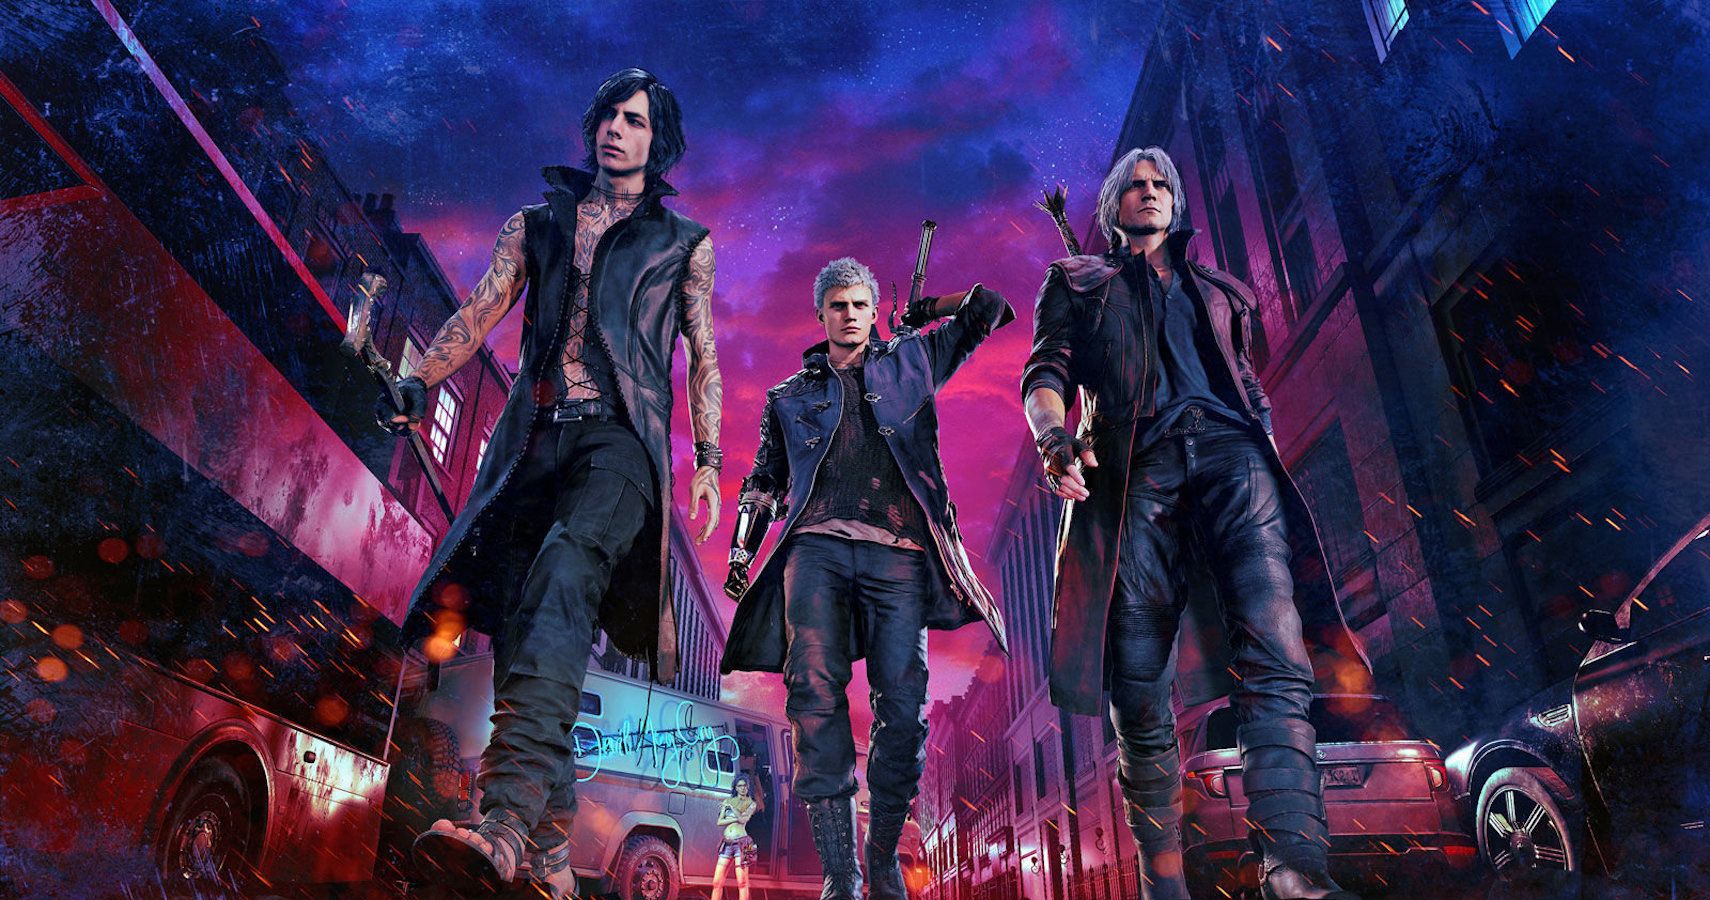 Devil May Cry 5 Microtransactions Are They Worth It